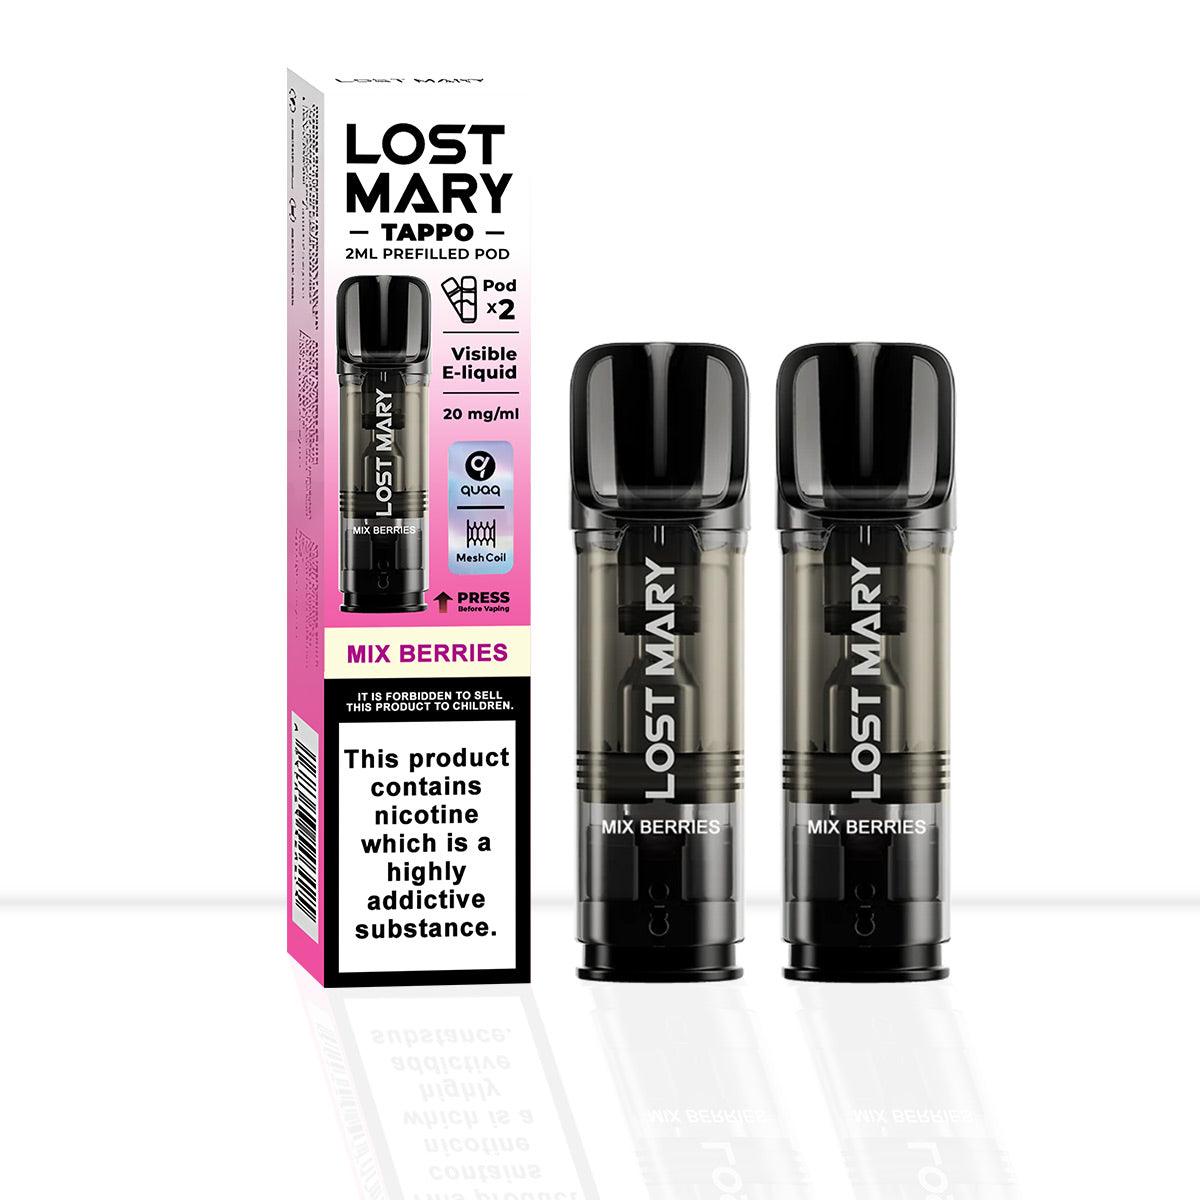 Lost Mary Tappo Mix Berries Vape Pods - Pod & Refills